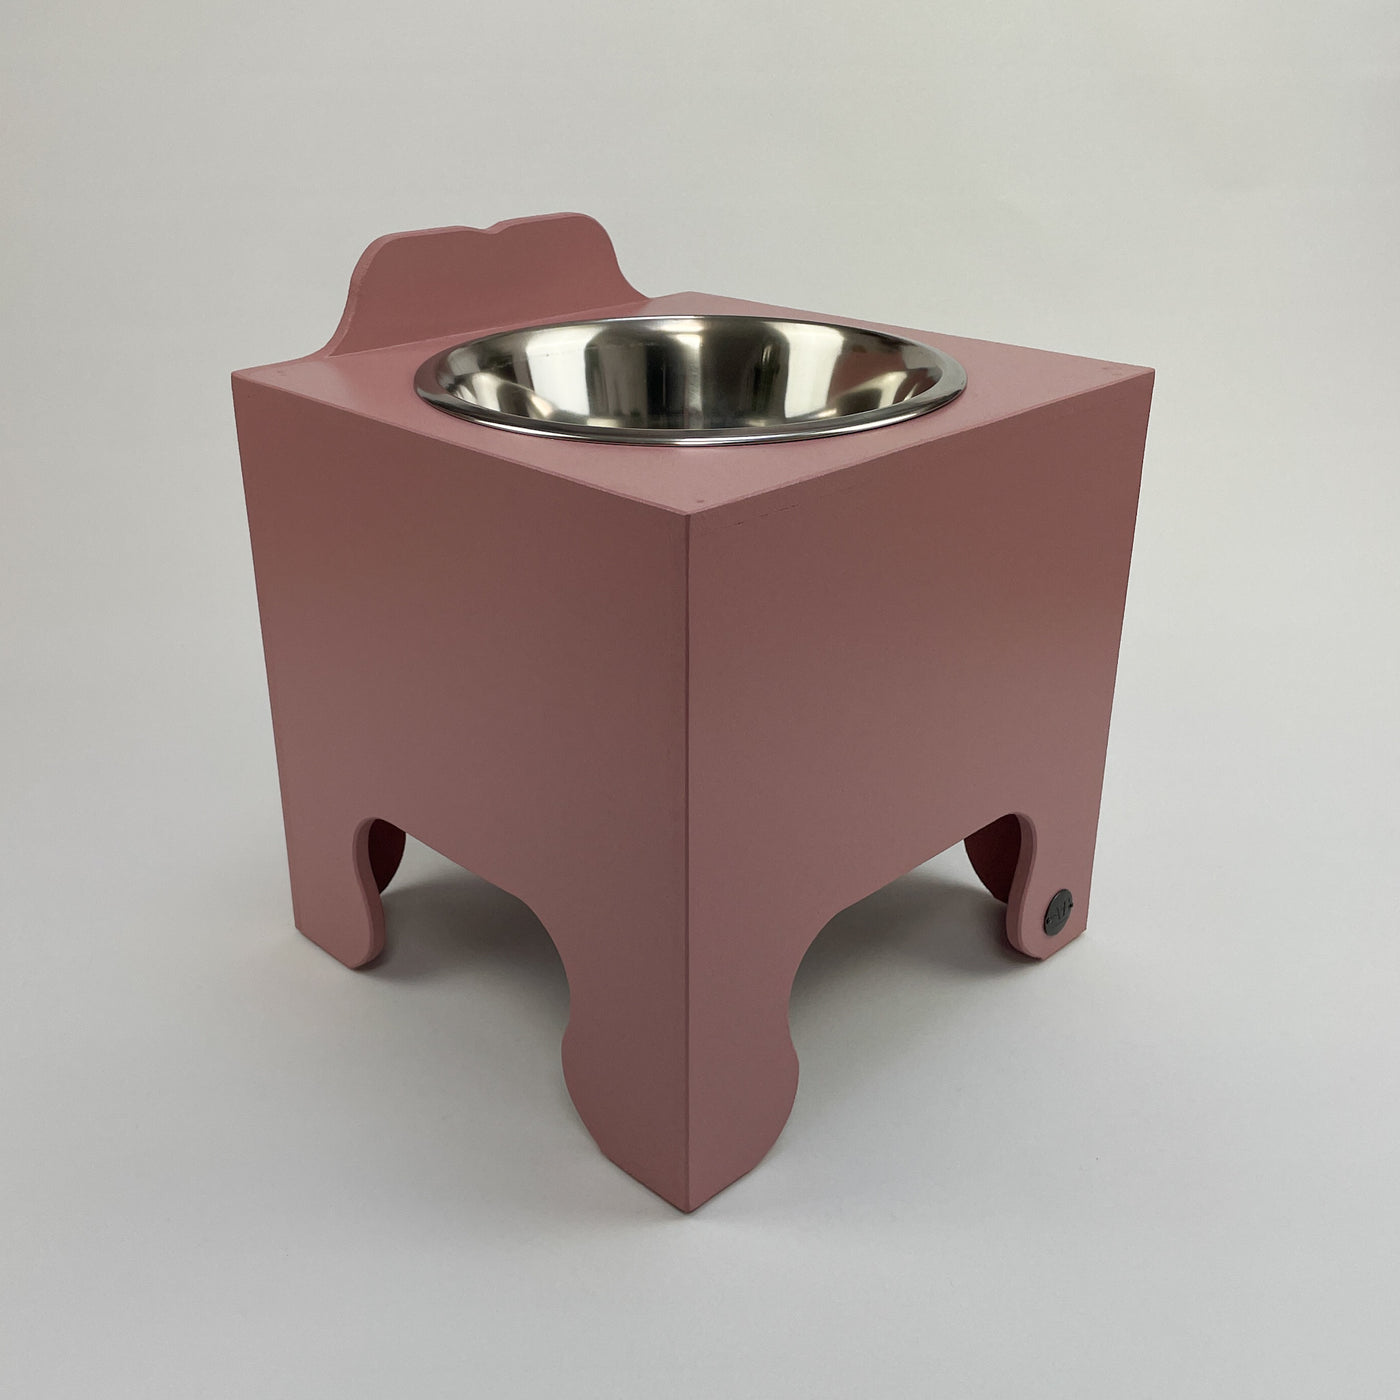 Raised dog feeder for a single dish, in blush pink